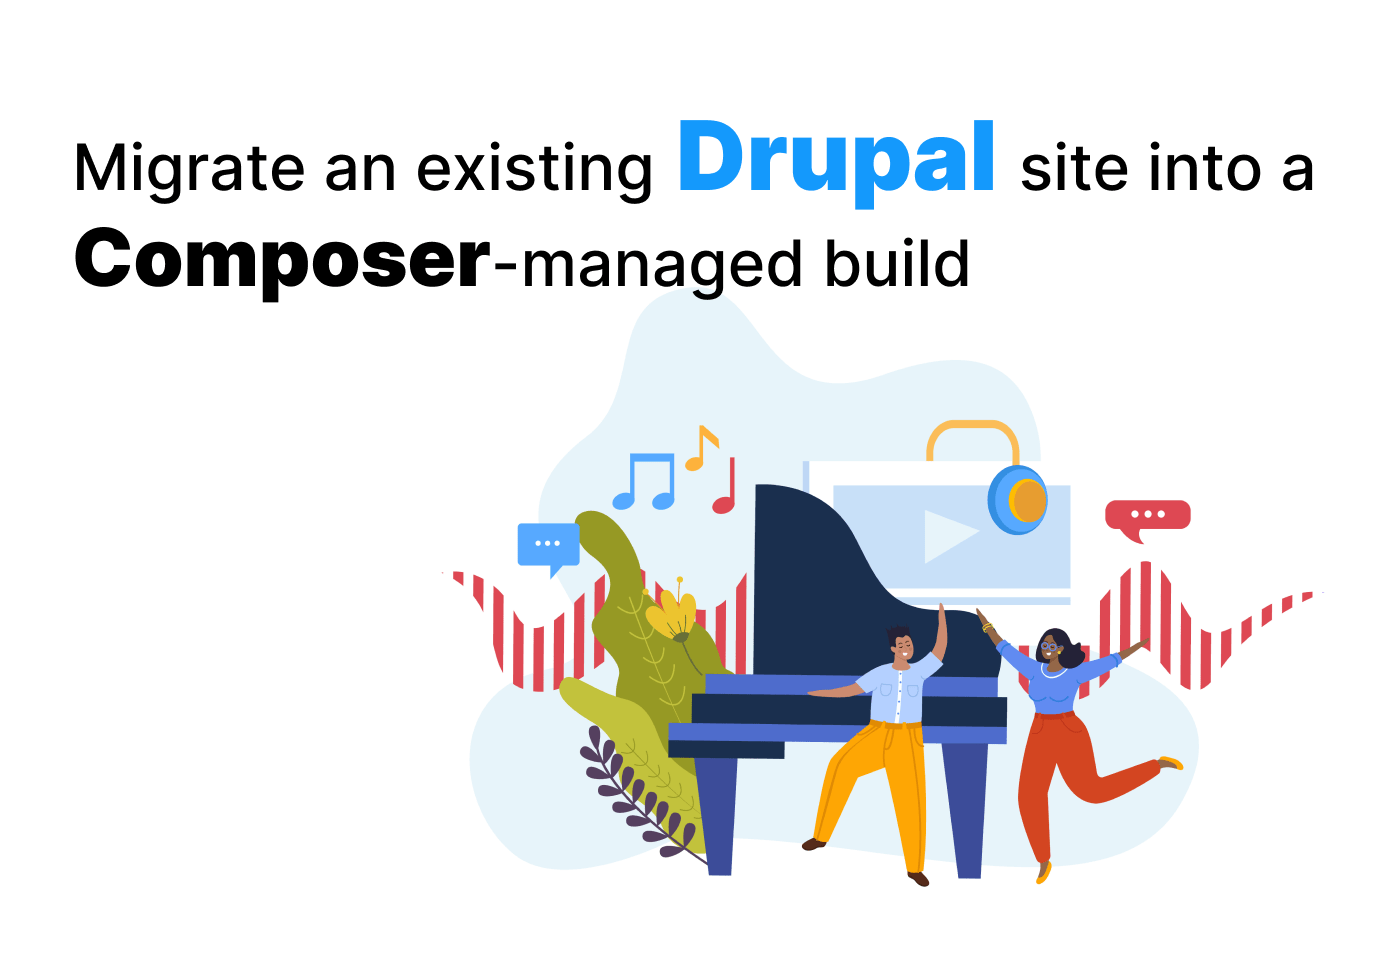 Migrate an existing Drupal site into a Composer-managed build image